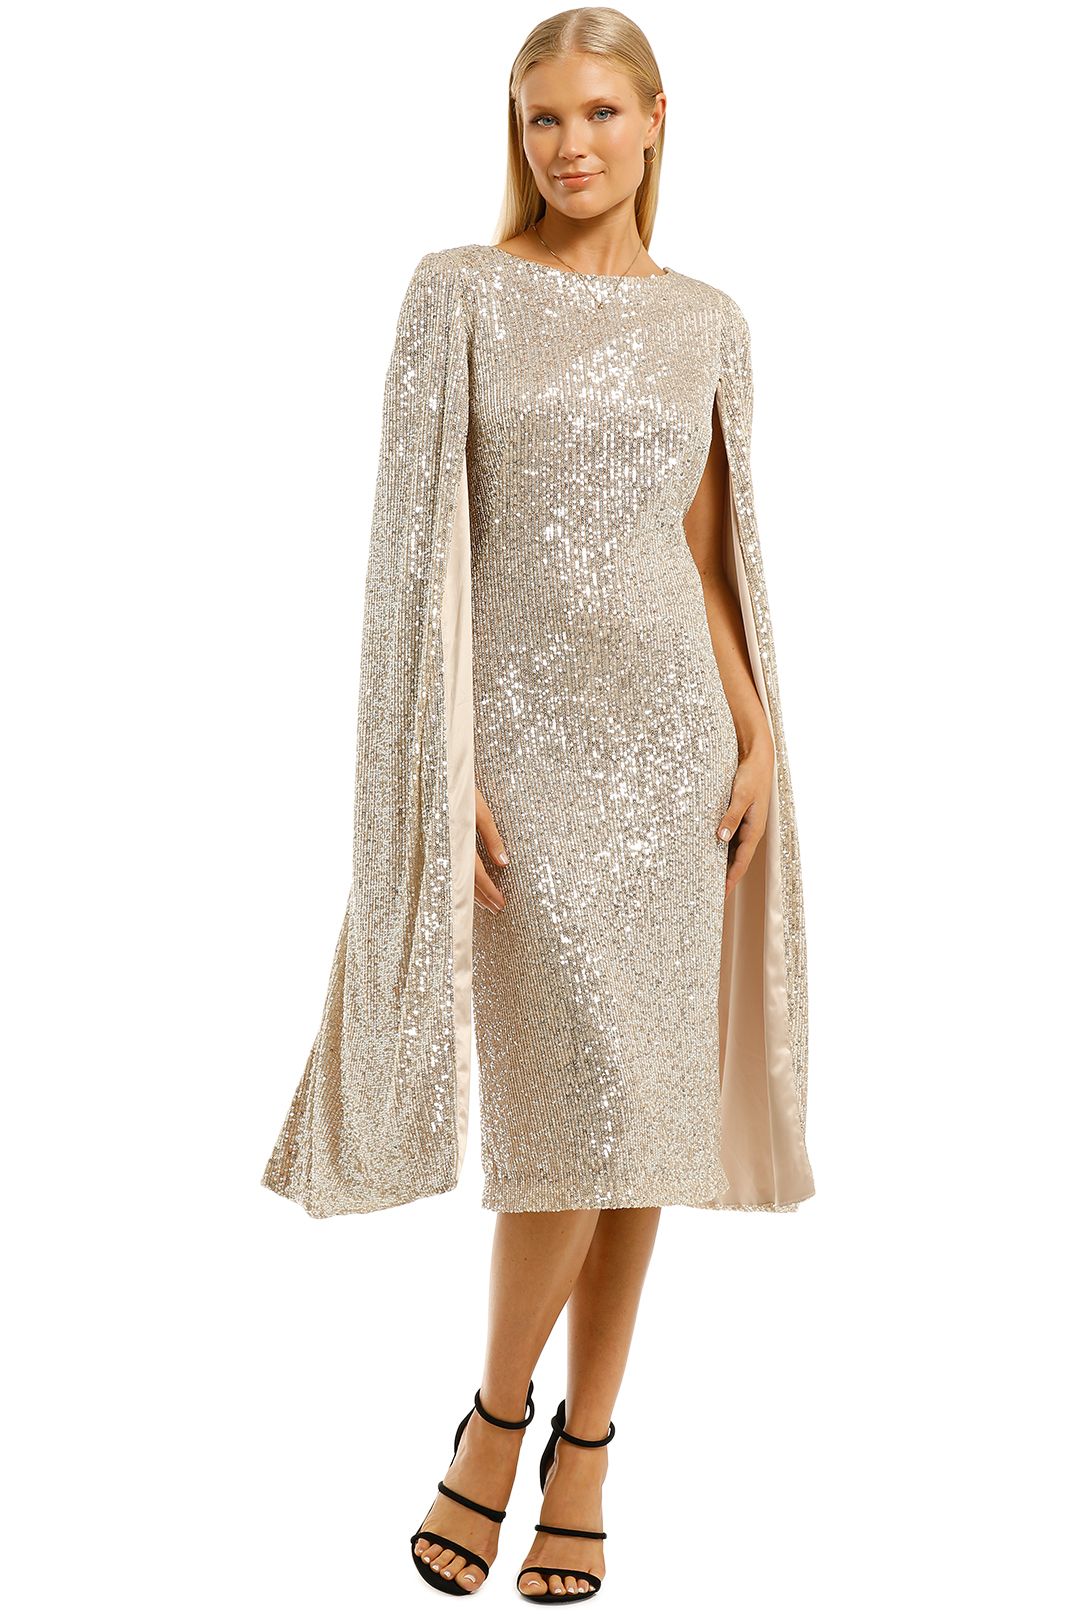 Trelise-Cooper-This-Changes-Everything-Champagne-Sequines-Front